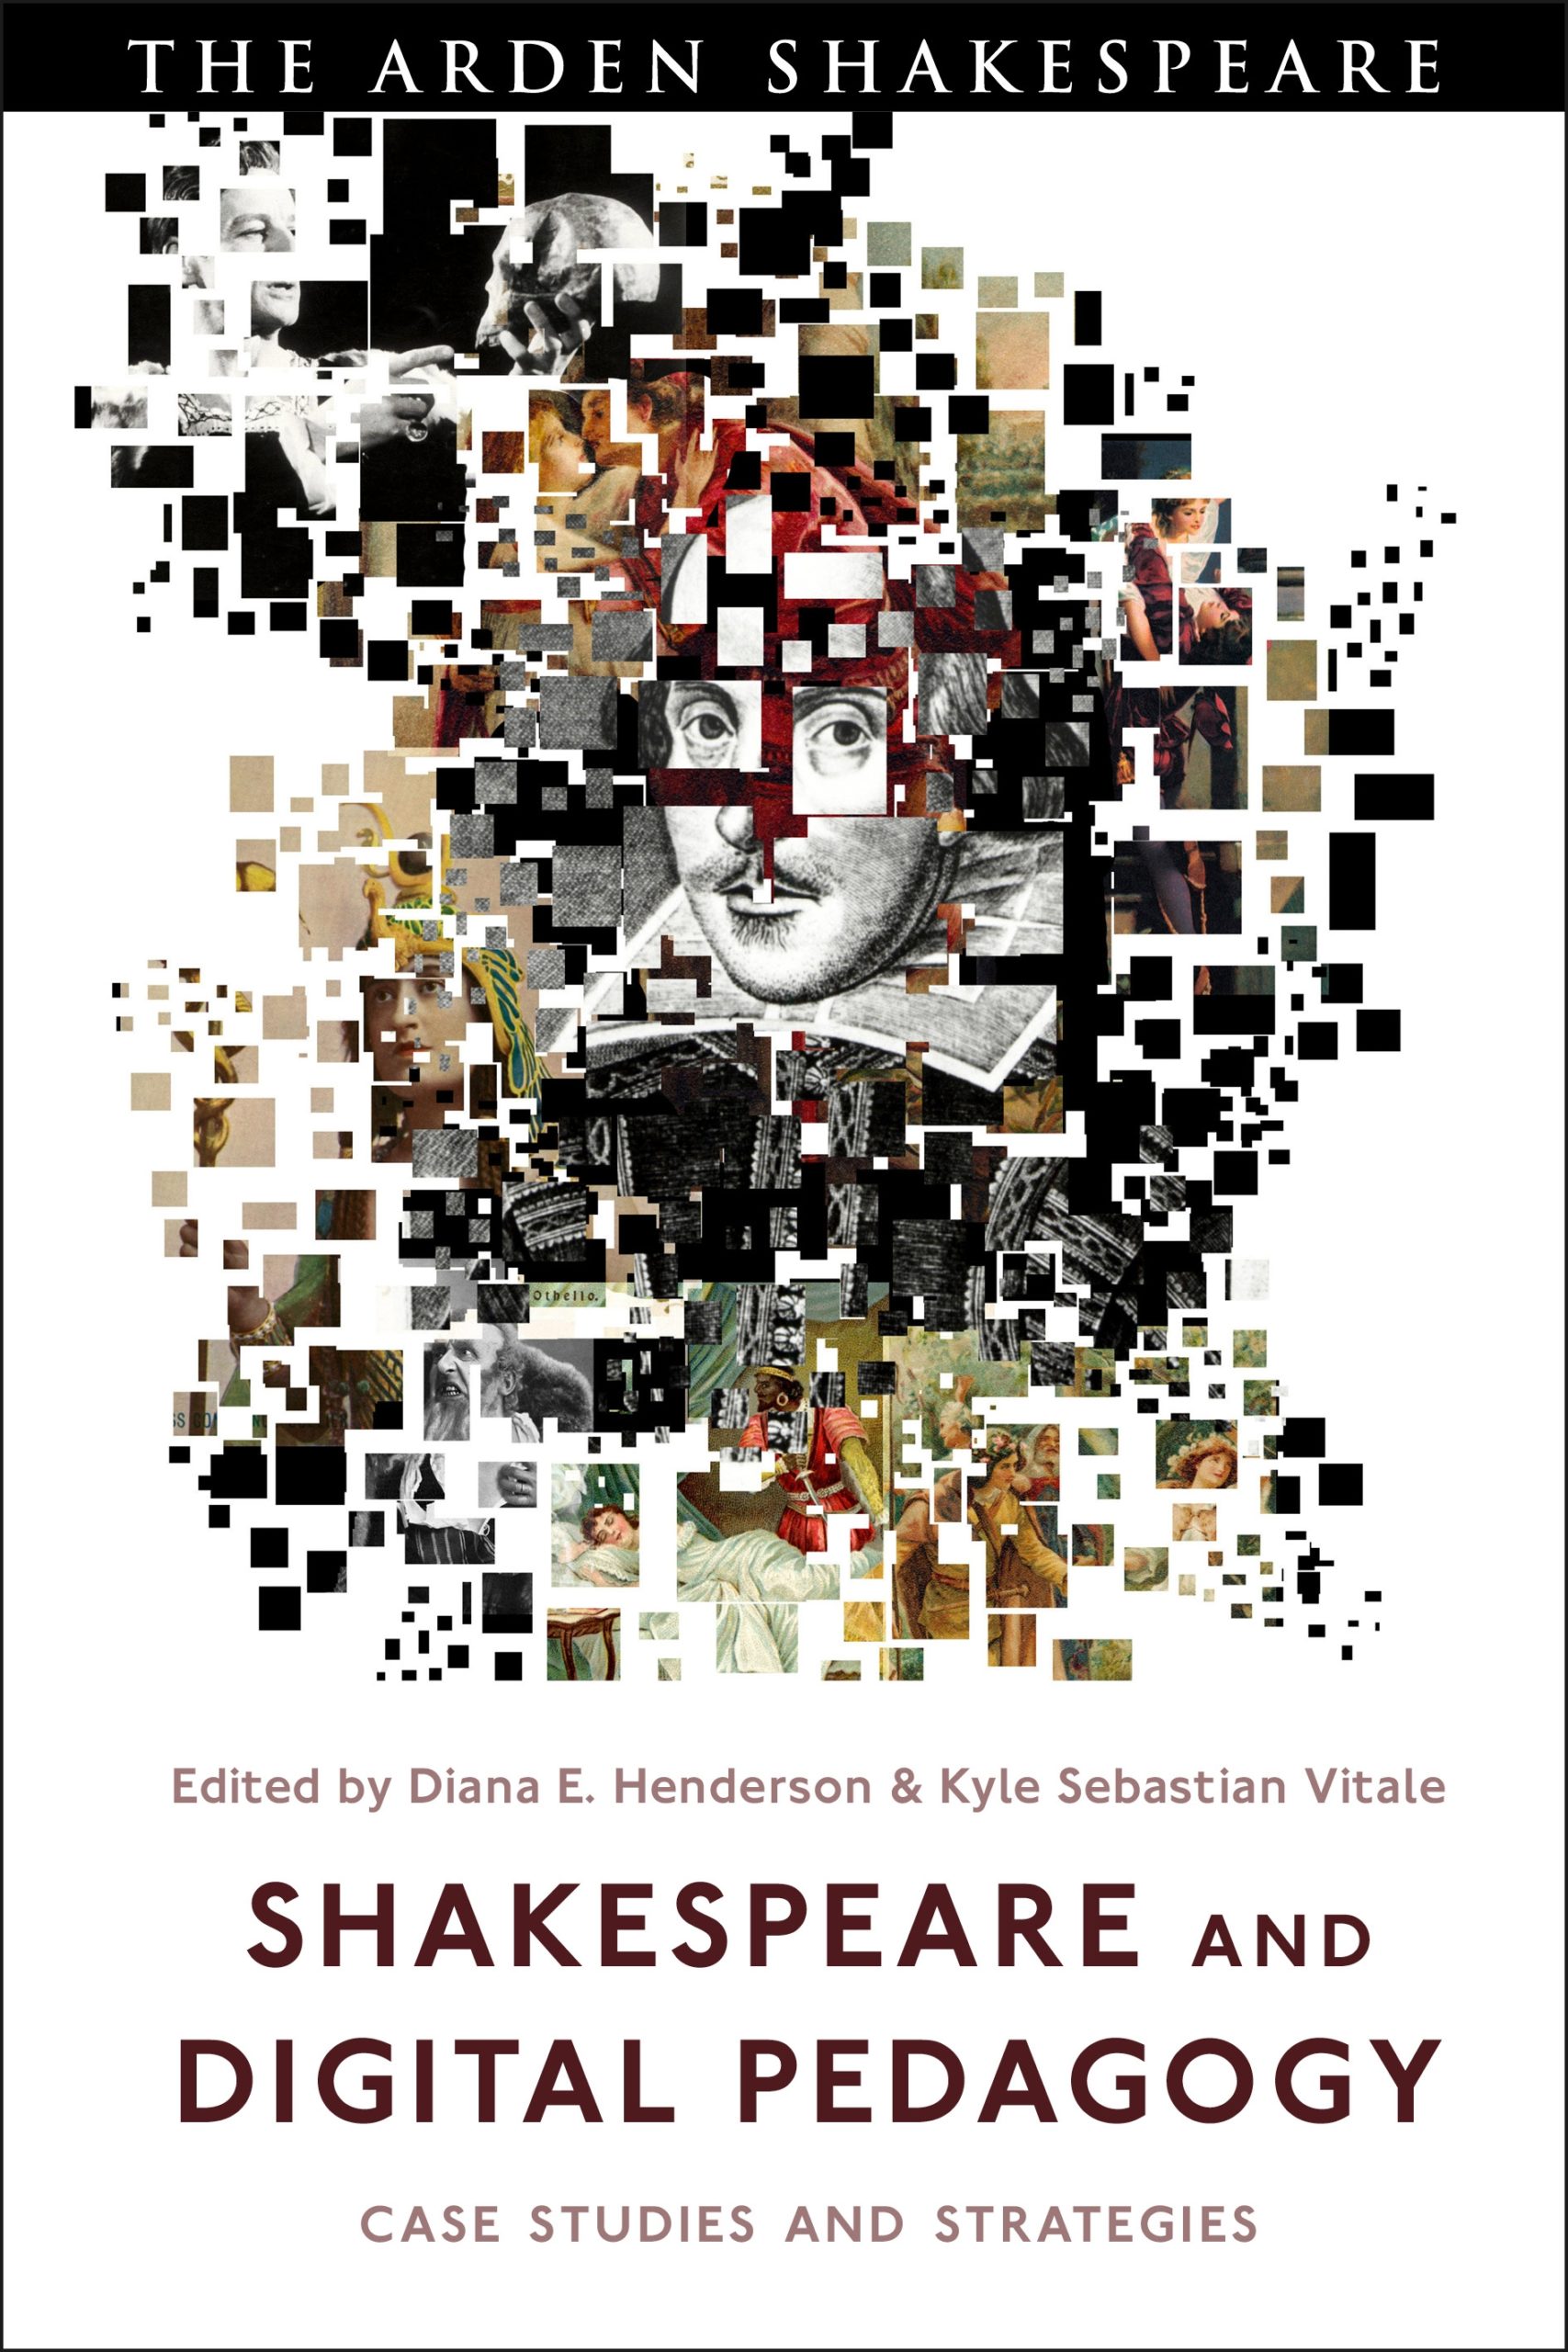 The Book Cover of Shakespeare and Digital Pedagogy